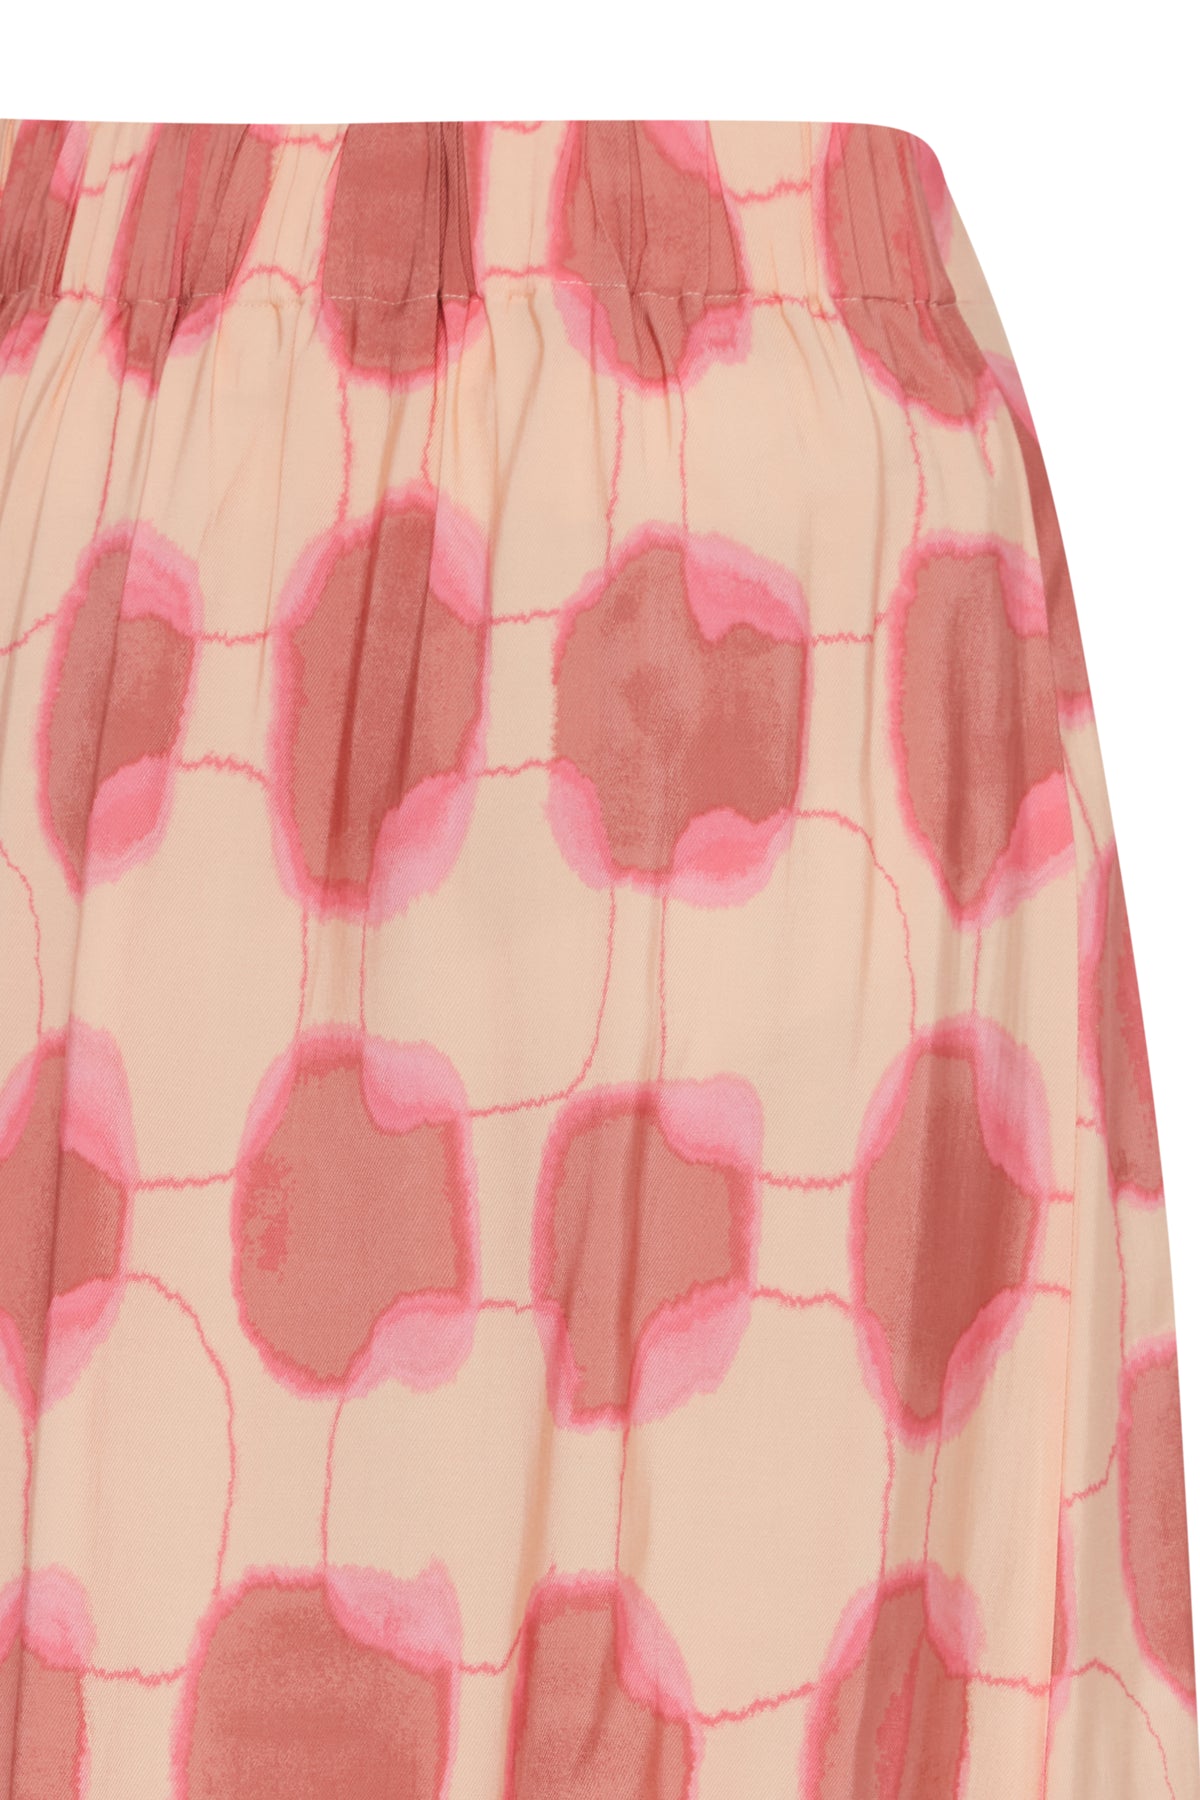 B.Young Hanva Pink Tie Dye Mix Printed Ankle Length Skirt, 20814930